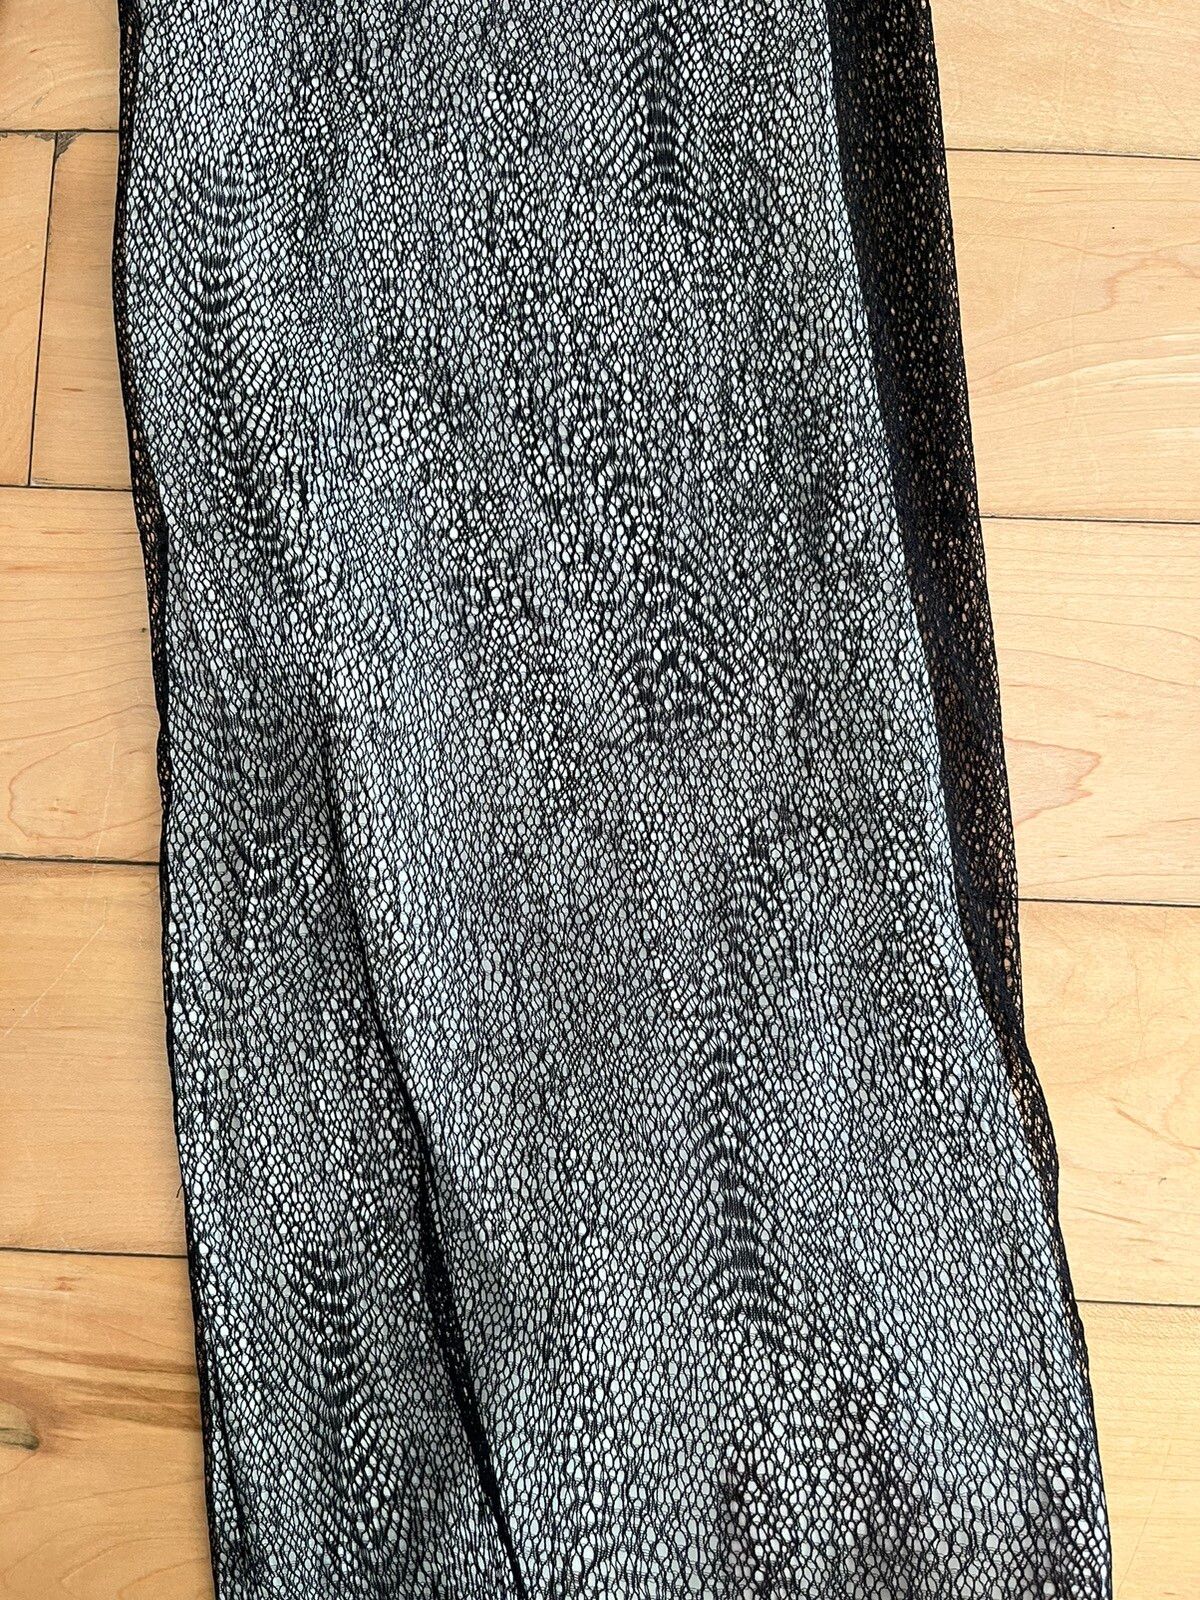 Other - NWT - Extremely Rare S/S15 Iris Van Herpen Pants - 3